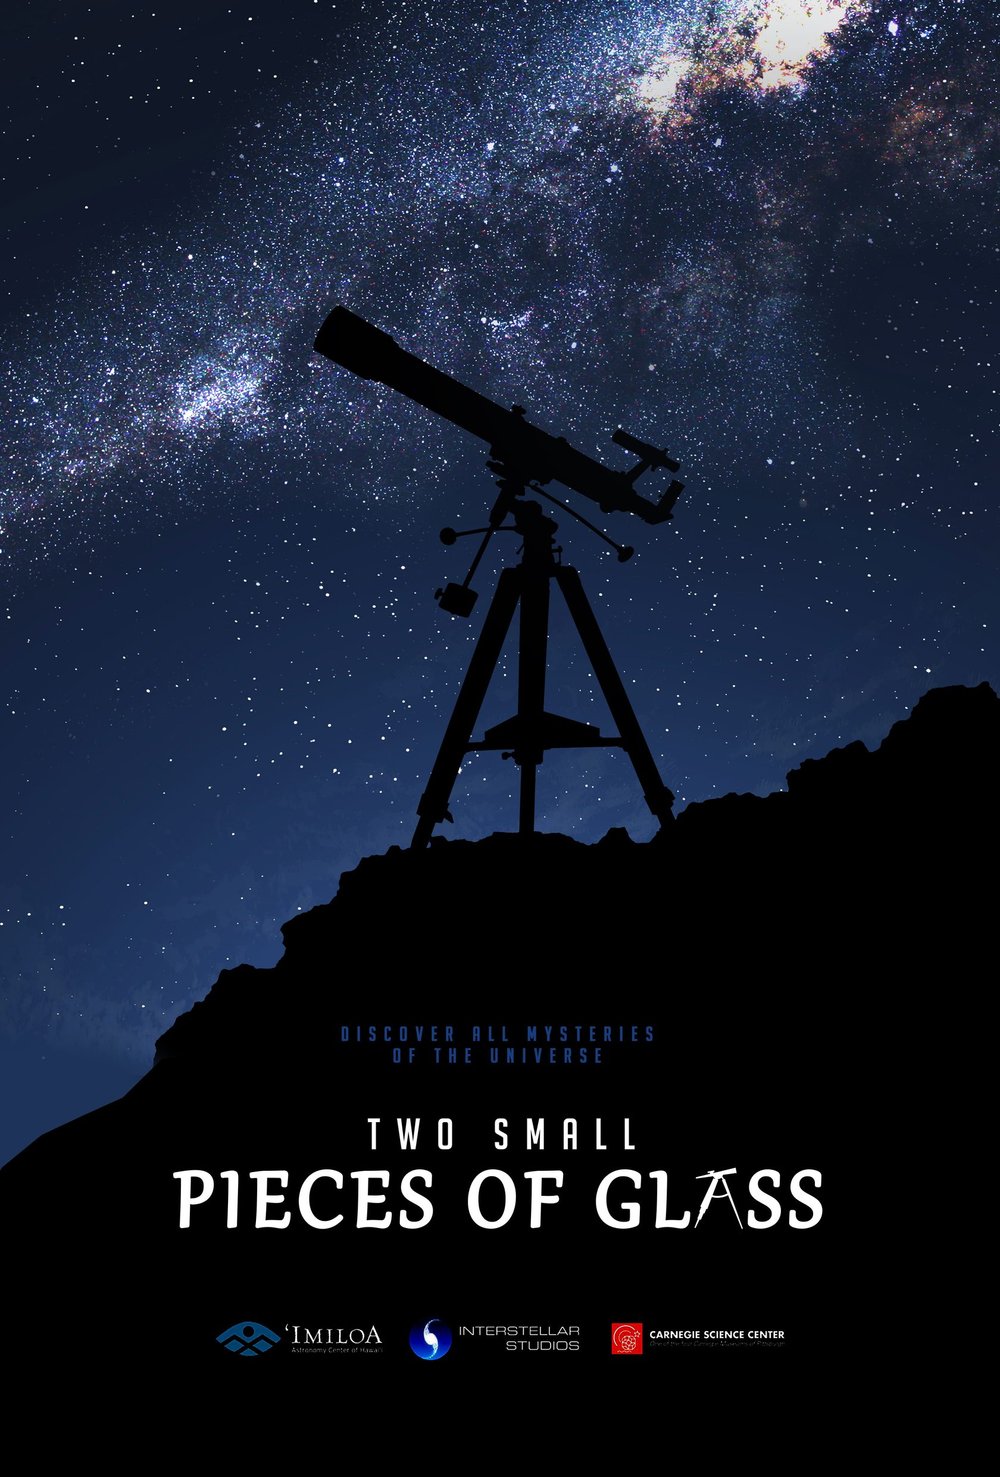 Two small pieces of Glass - The Amazing Telescope